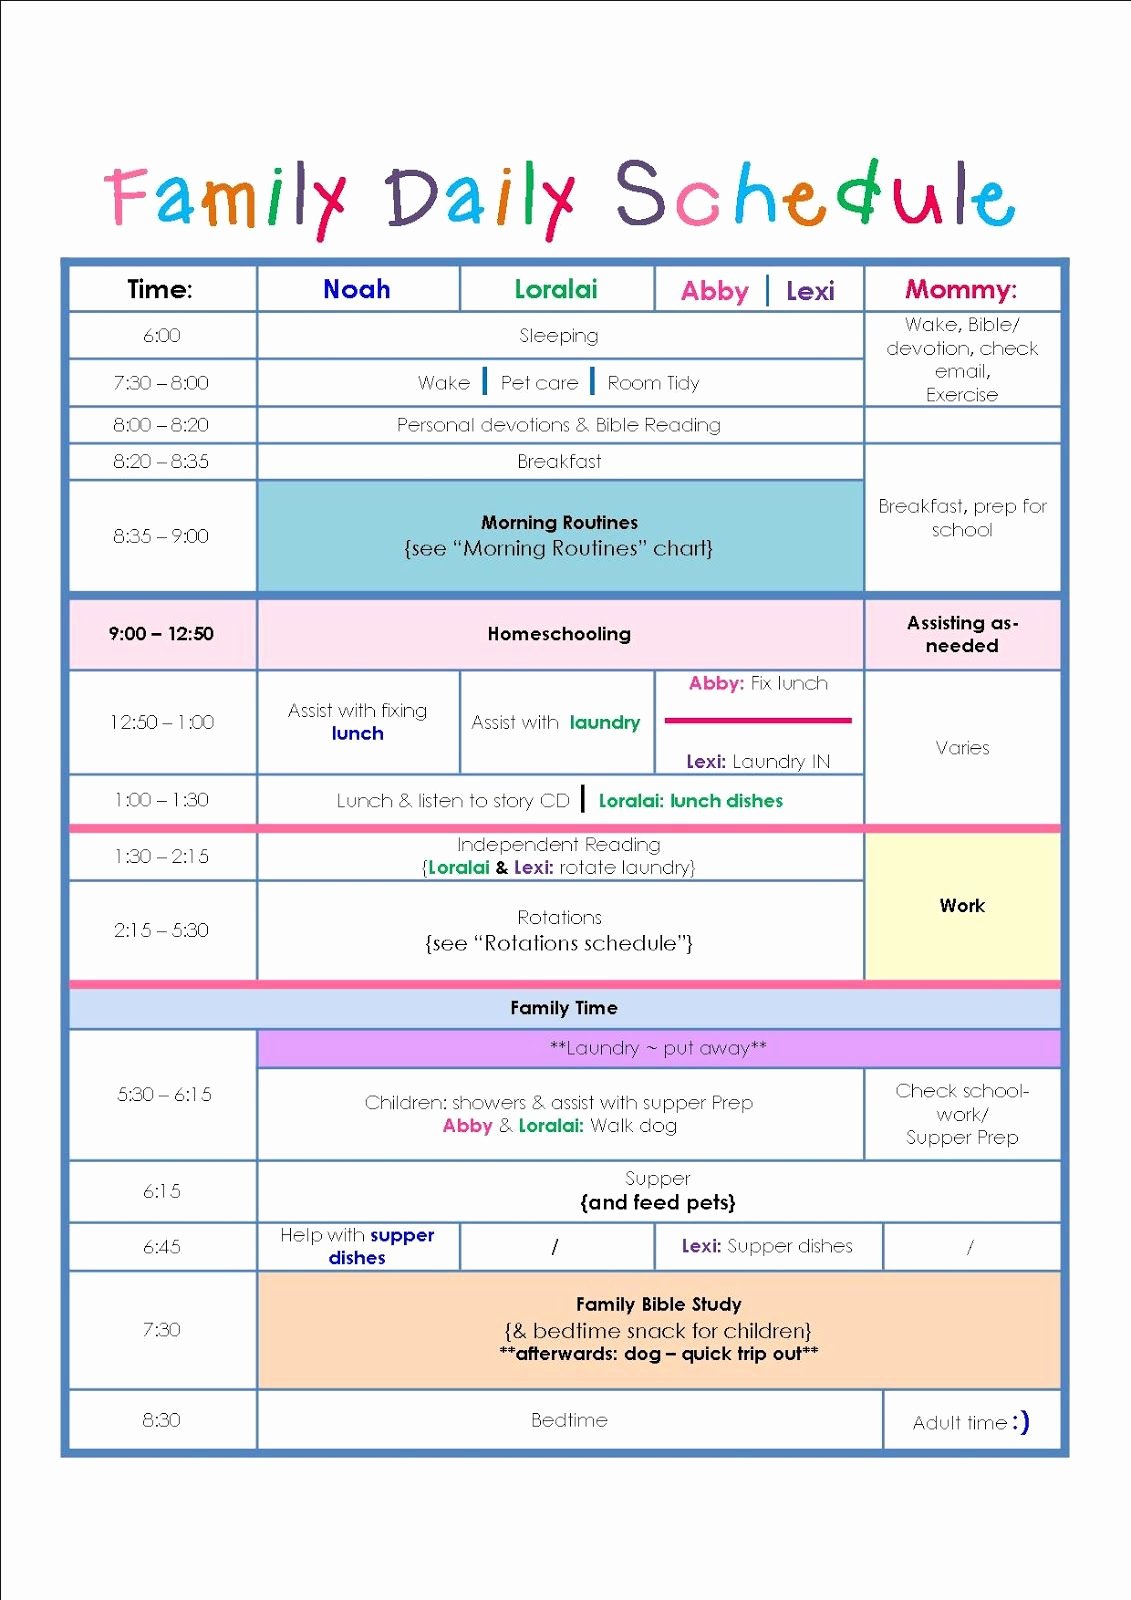 Parenting Time Calendar Template New Family Daily Routine Schedule Template …